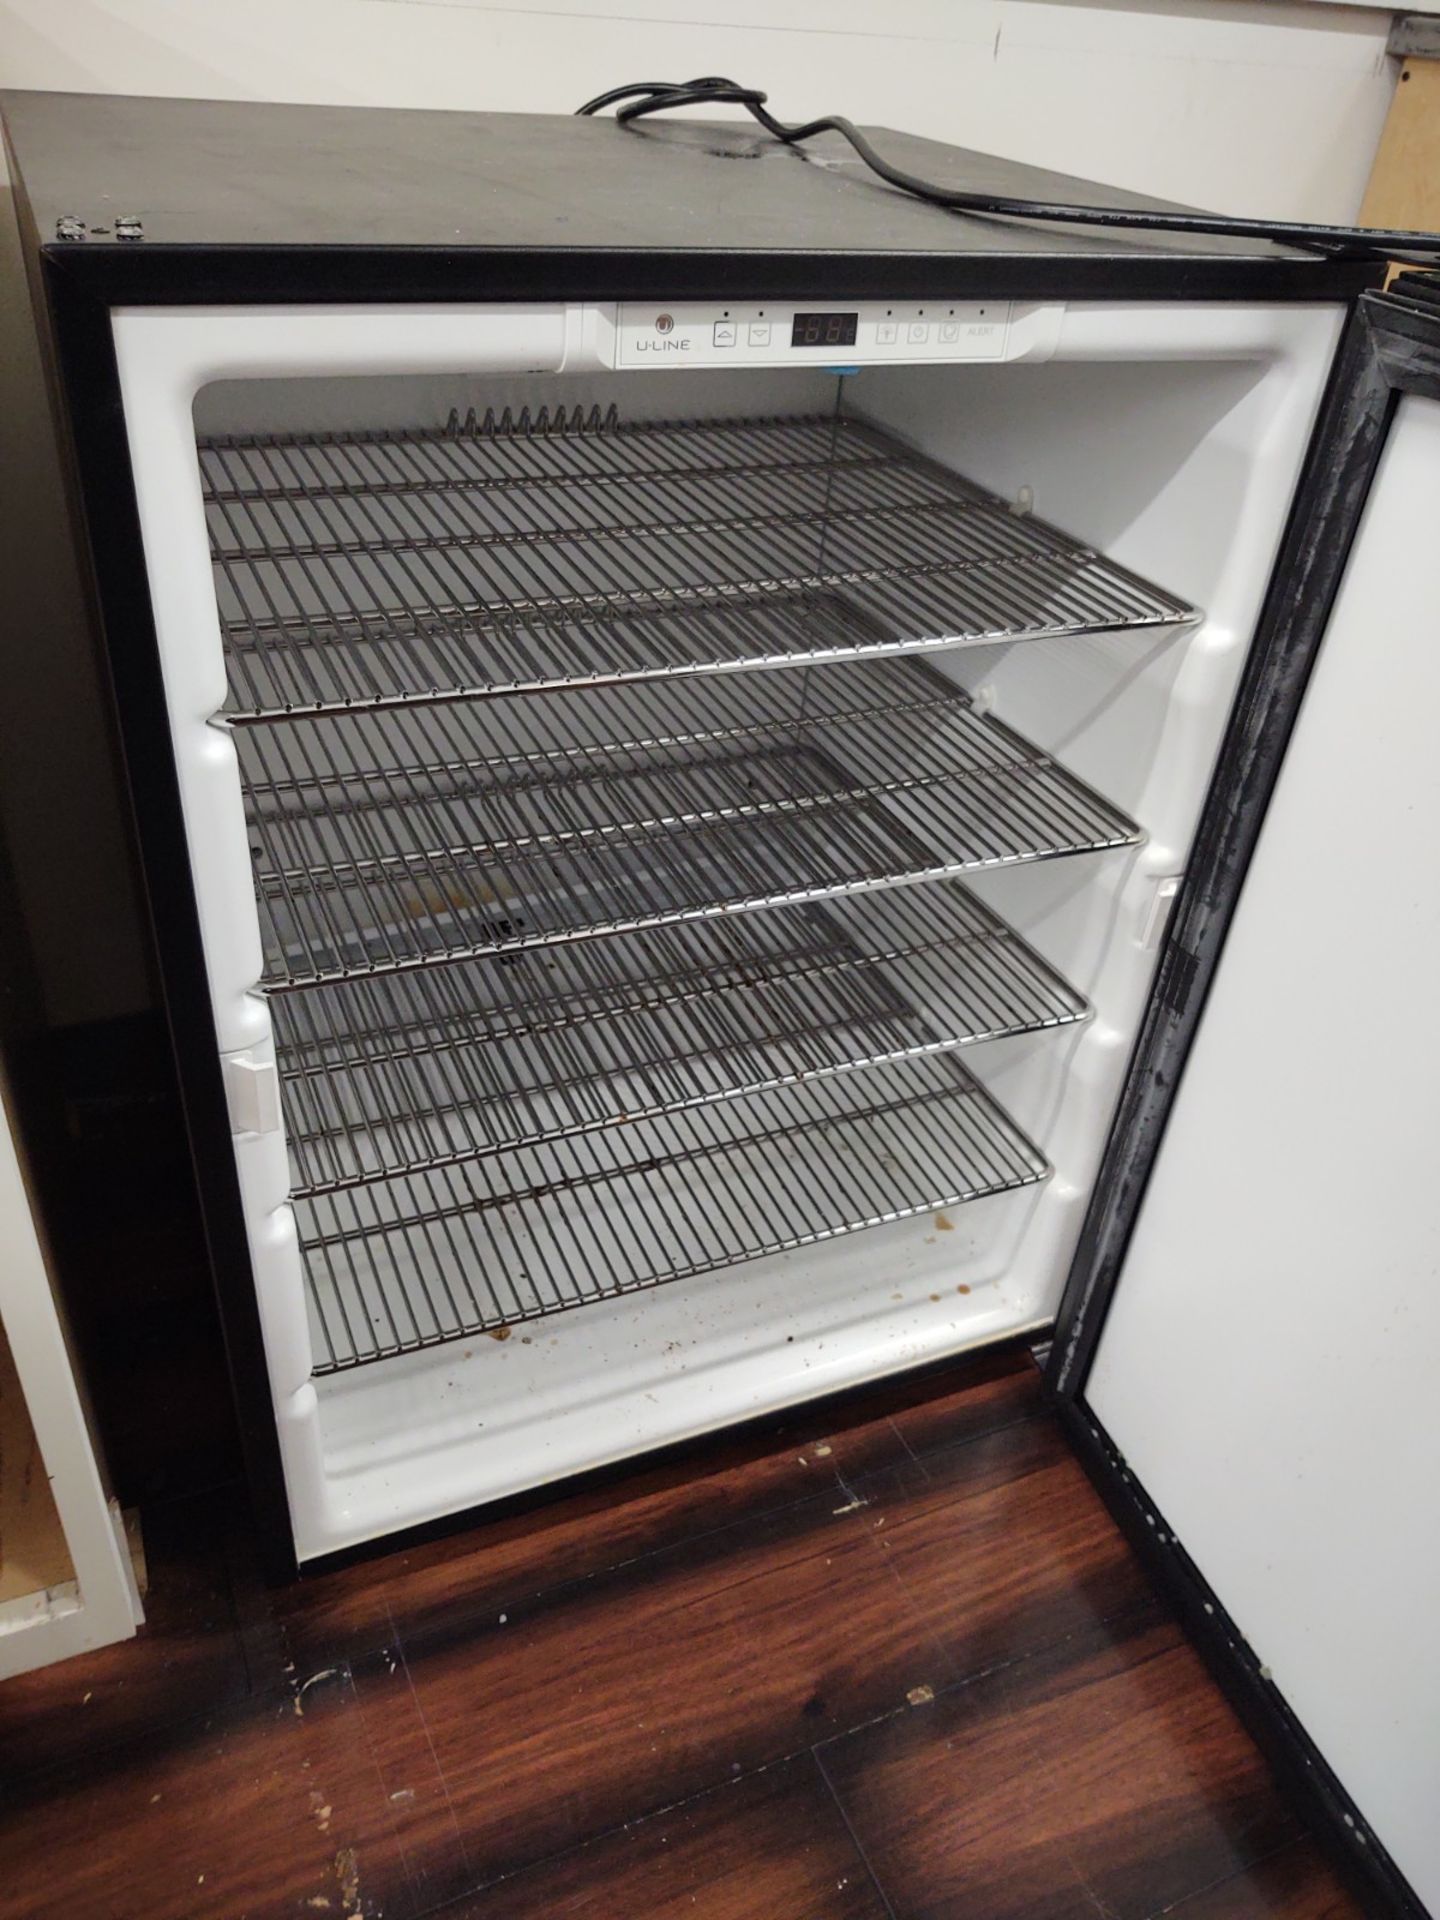 Uline Undercounter 24" Stainless Steel Front Refrigerator (USED) - Image 2 of 2